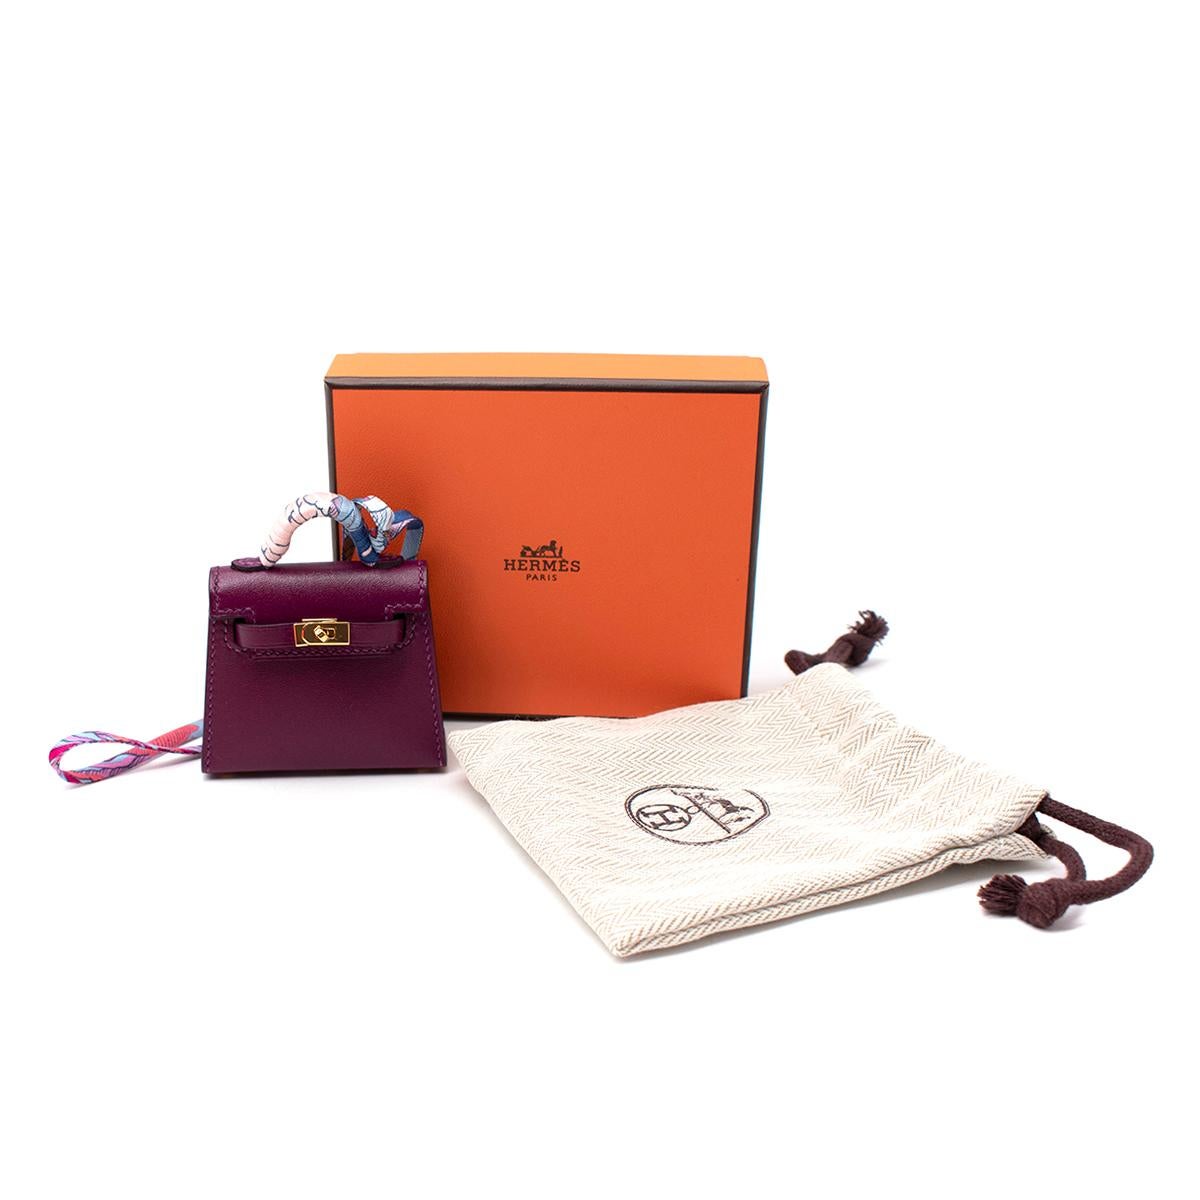 Hermes Anemone Swift/Chevre Leather Micro Kelly Charm

- Age Z - 2021
- Official Colour Anemone
- Gold plated hardware
- silk printed strap wrapped around the rolled top handle
- Fully functioning and opens as a kelly bag would
- Original box and